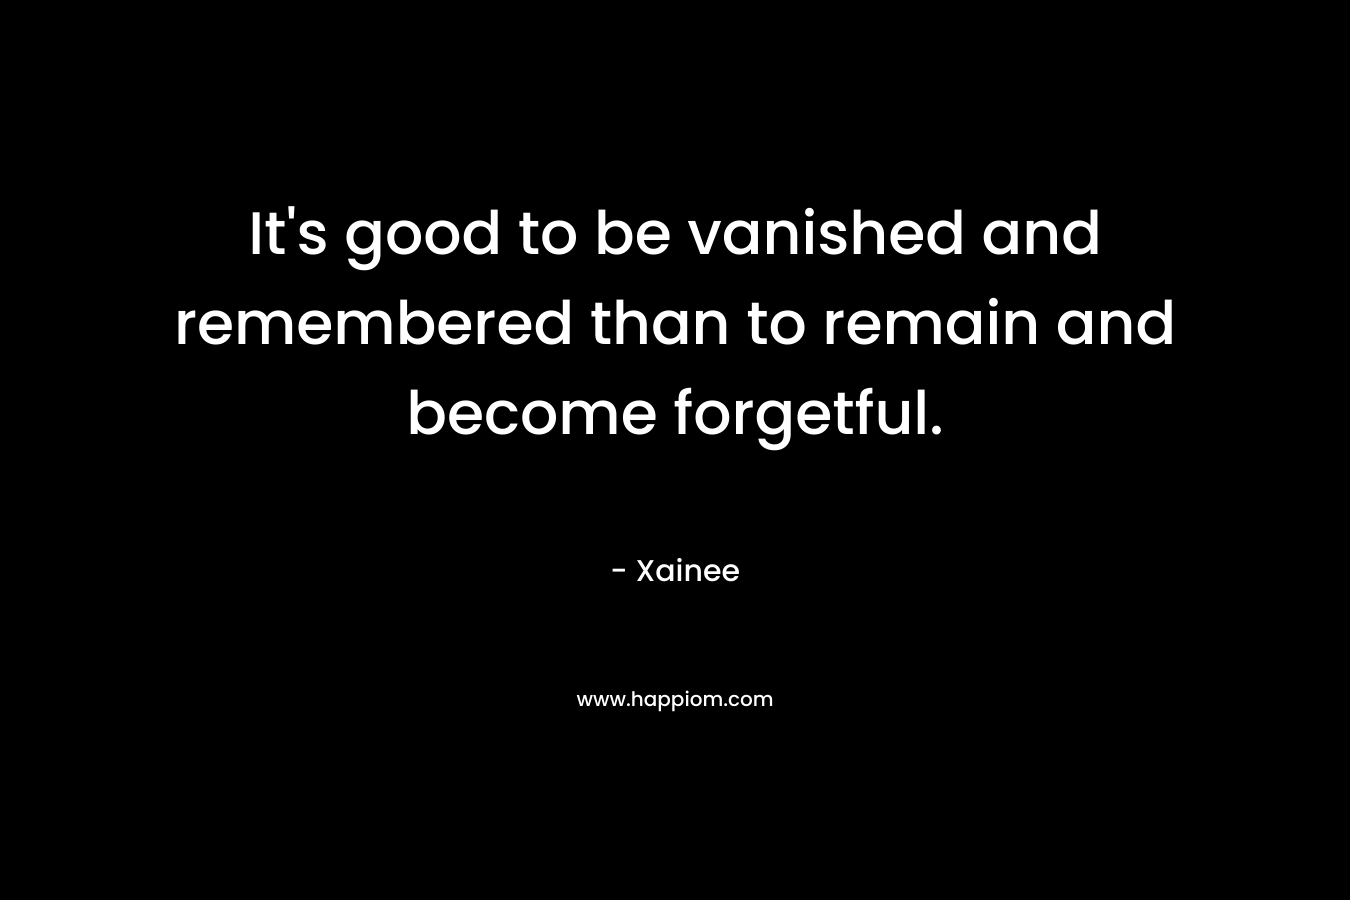 It's good to be vanished and remembered than to remain and become forgetful.